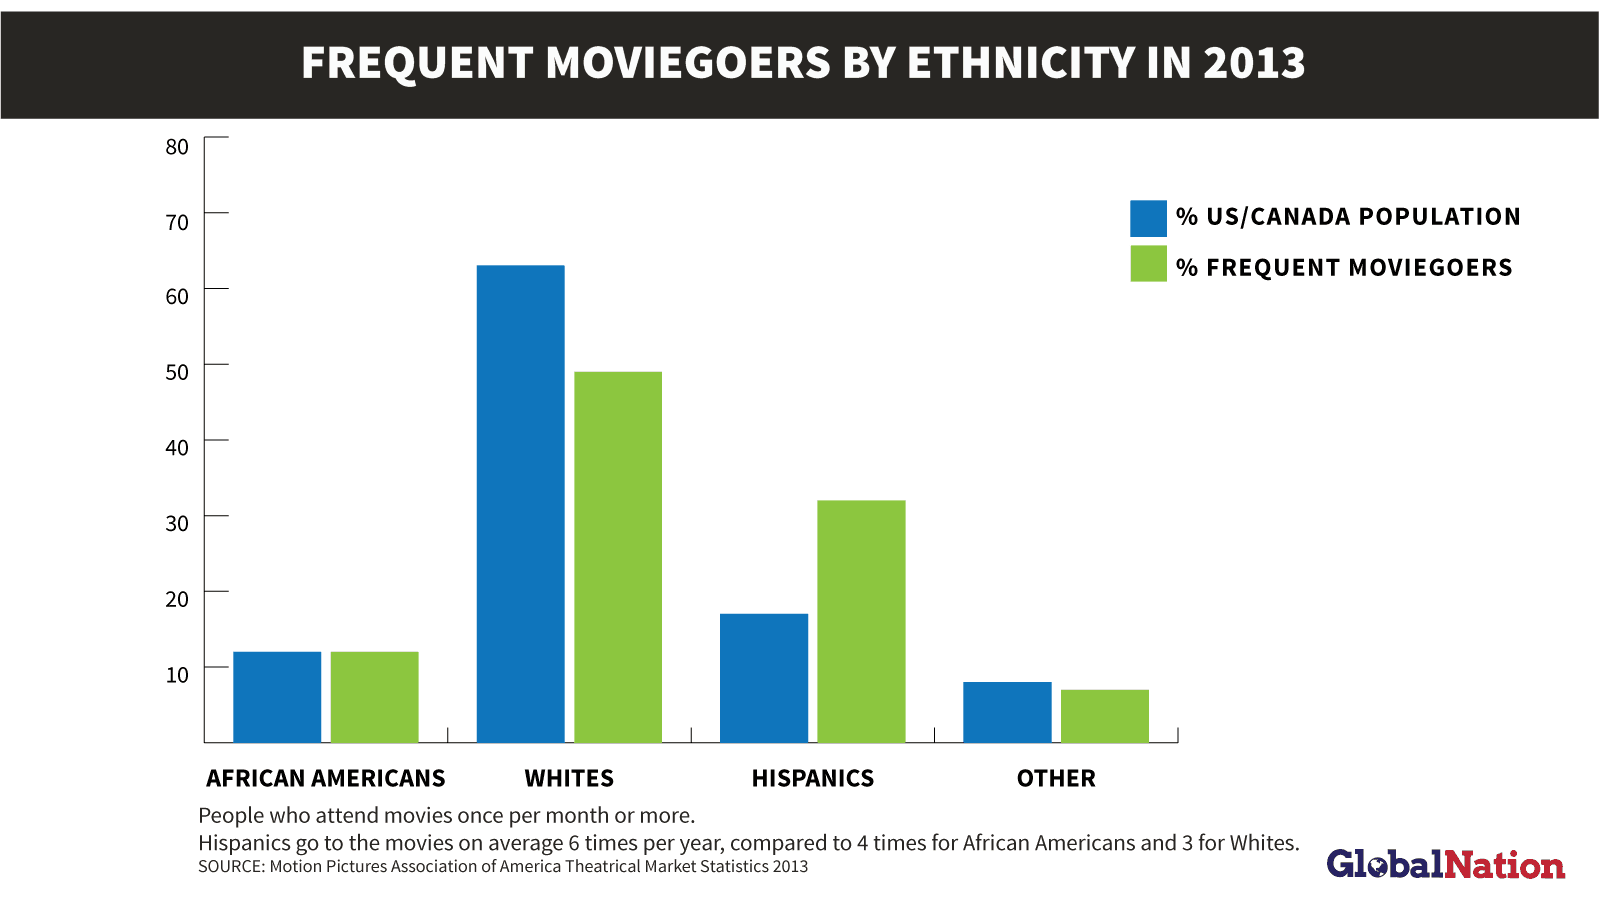 Hispanics go to the movies on average six times per year. Data from MPAA